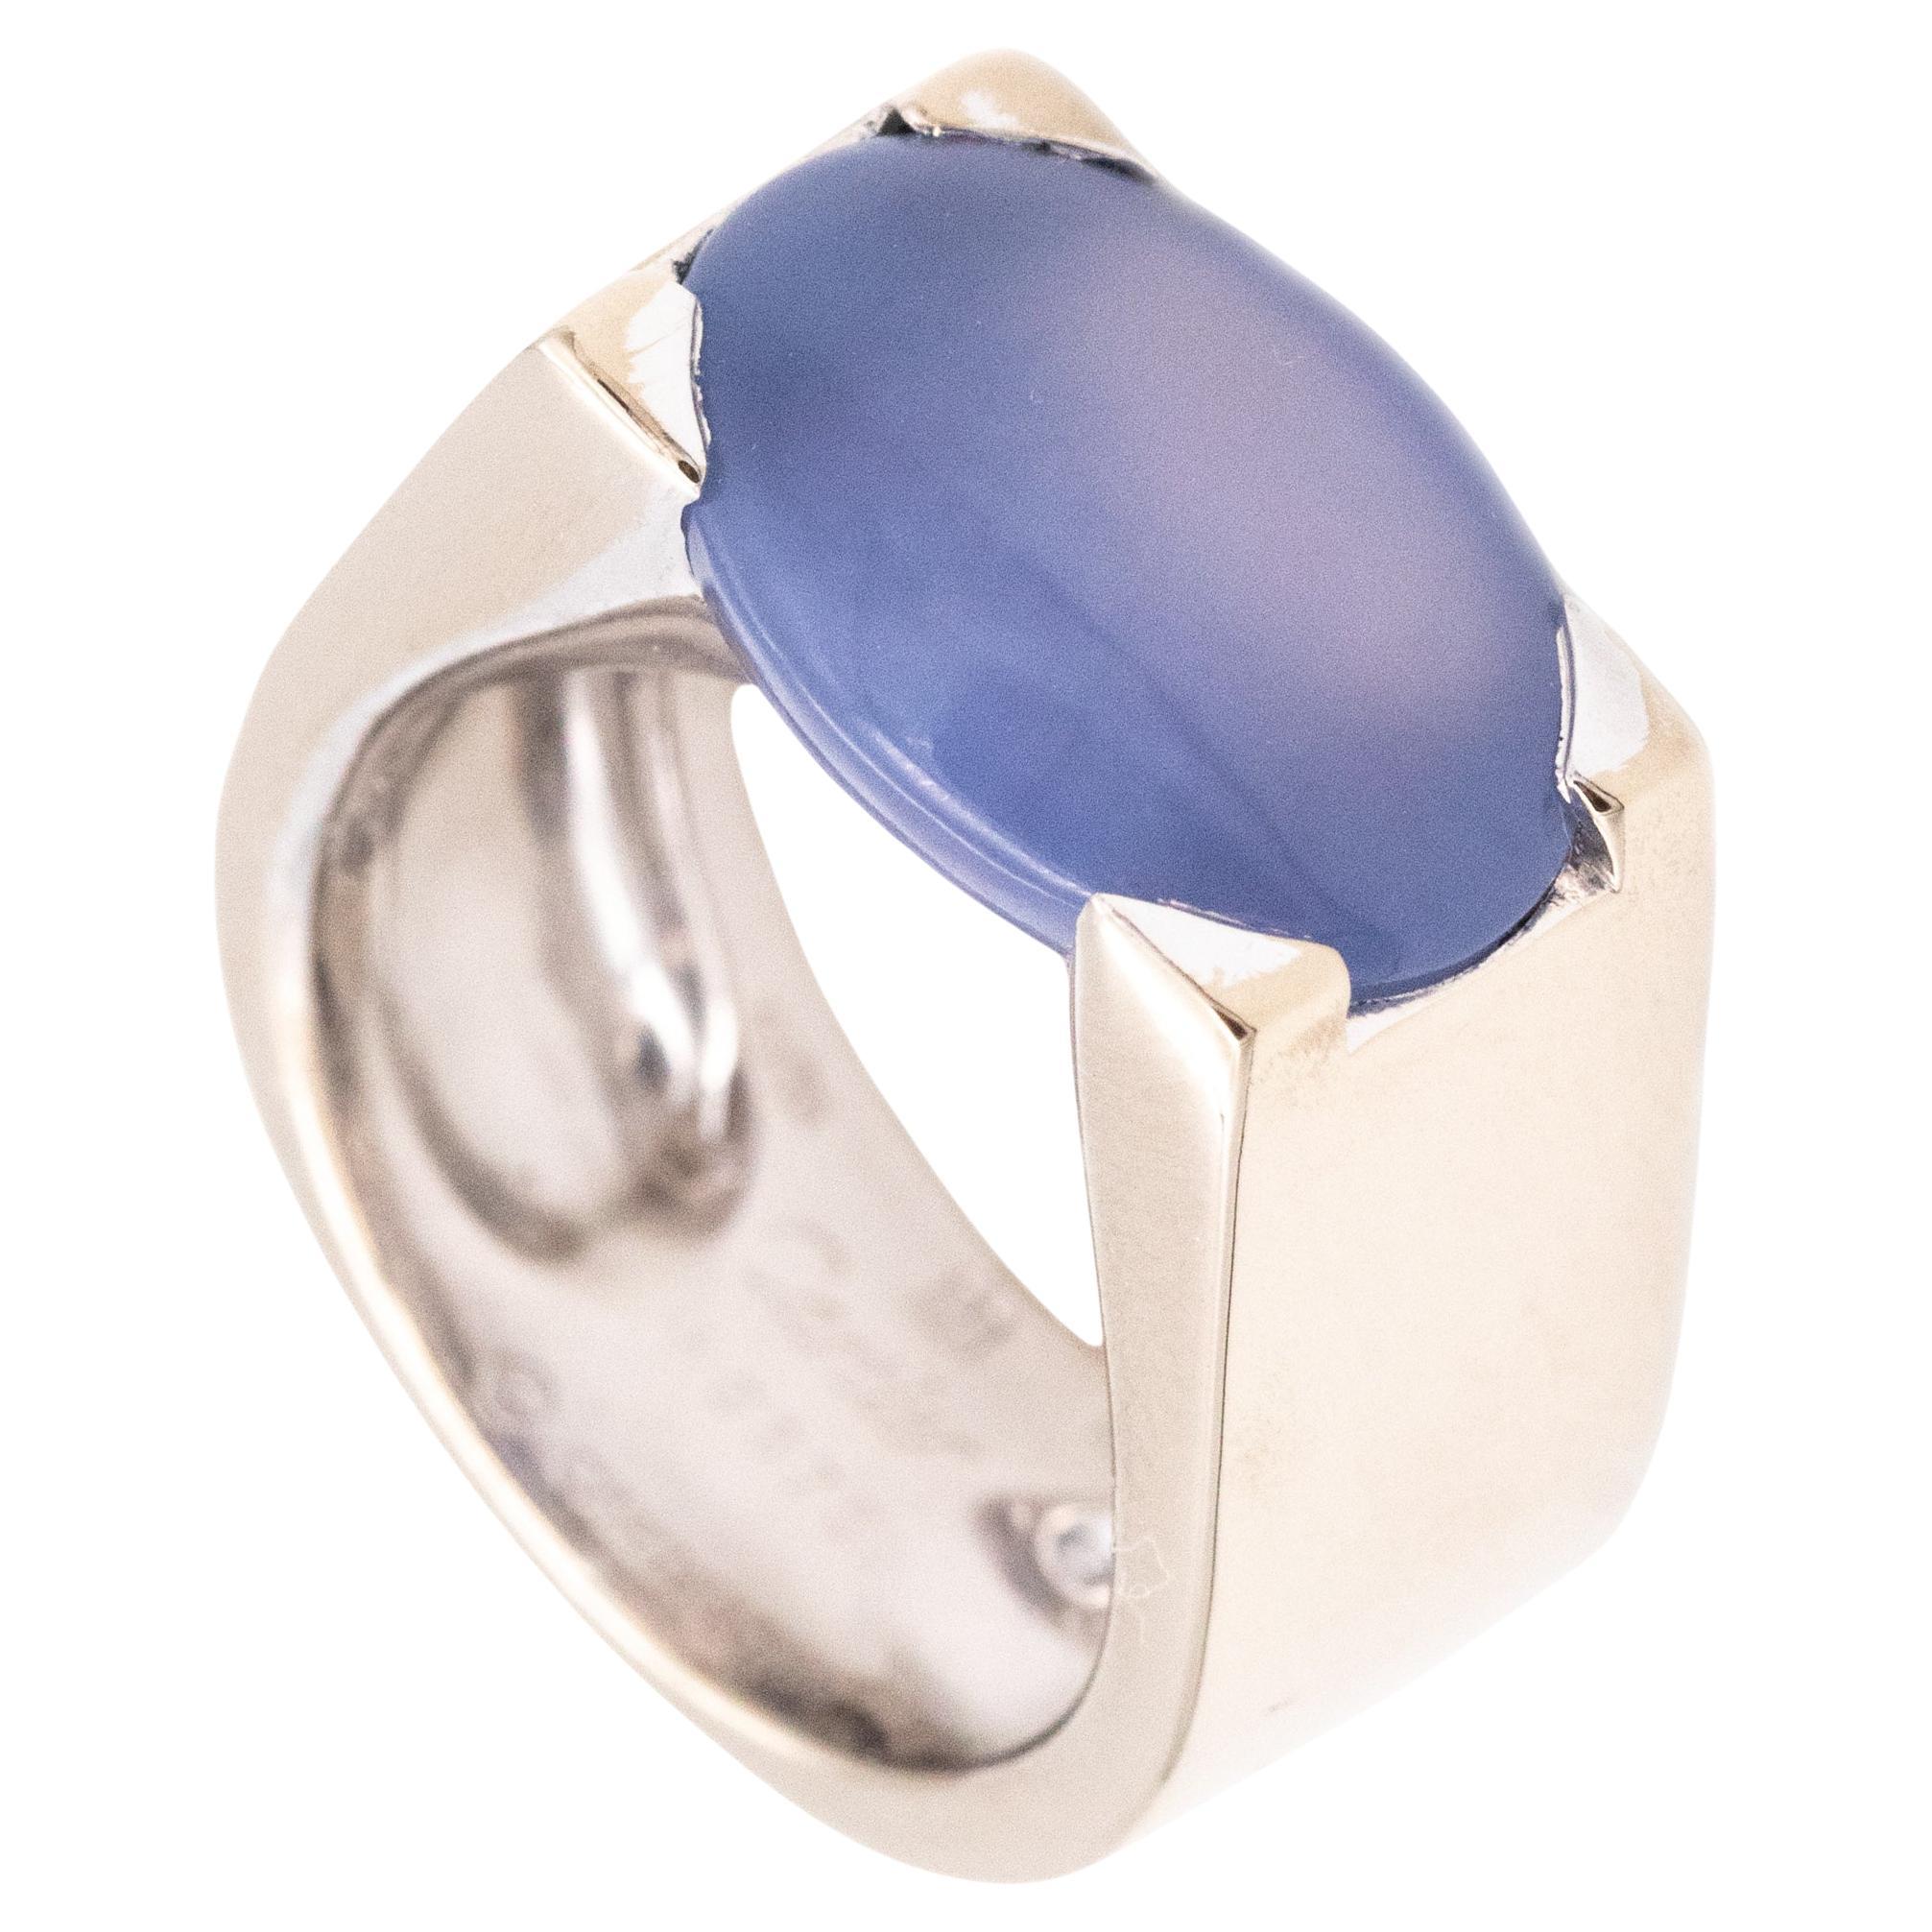 Cartier Paris Tankissine Chevalier Ring in 18 Karat White Gold and Chalcedony